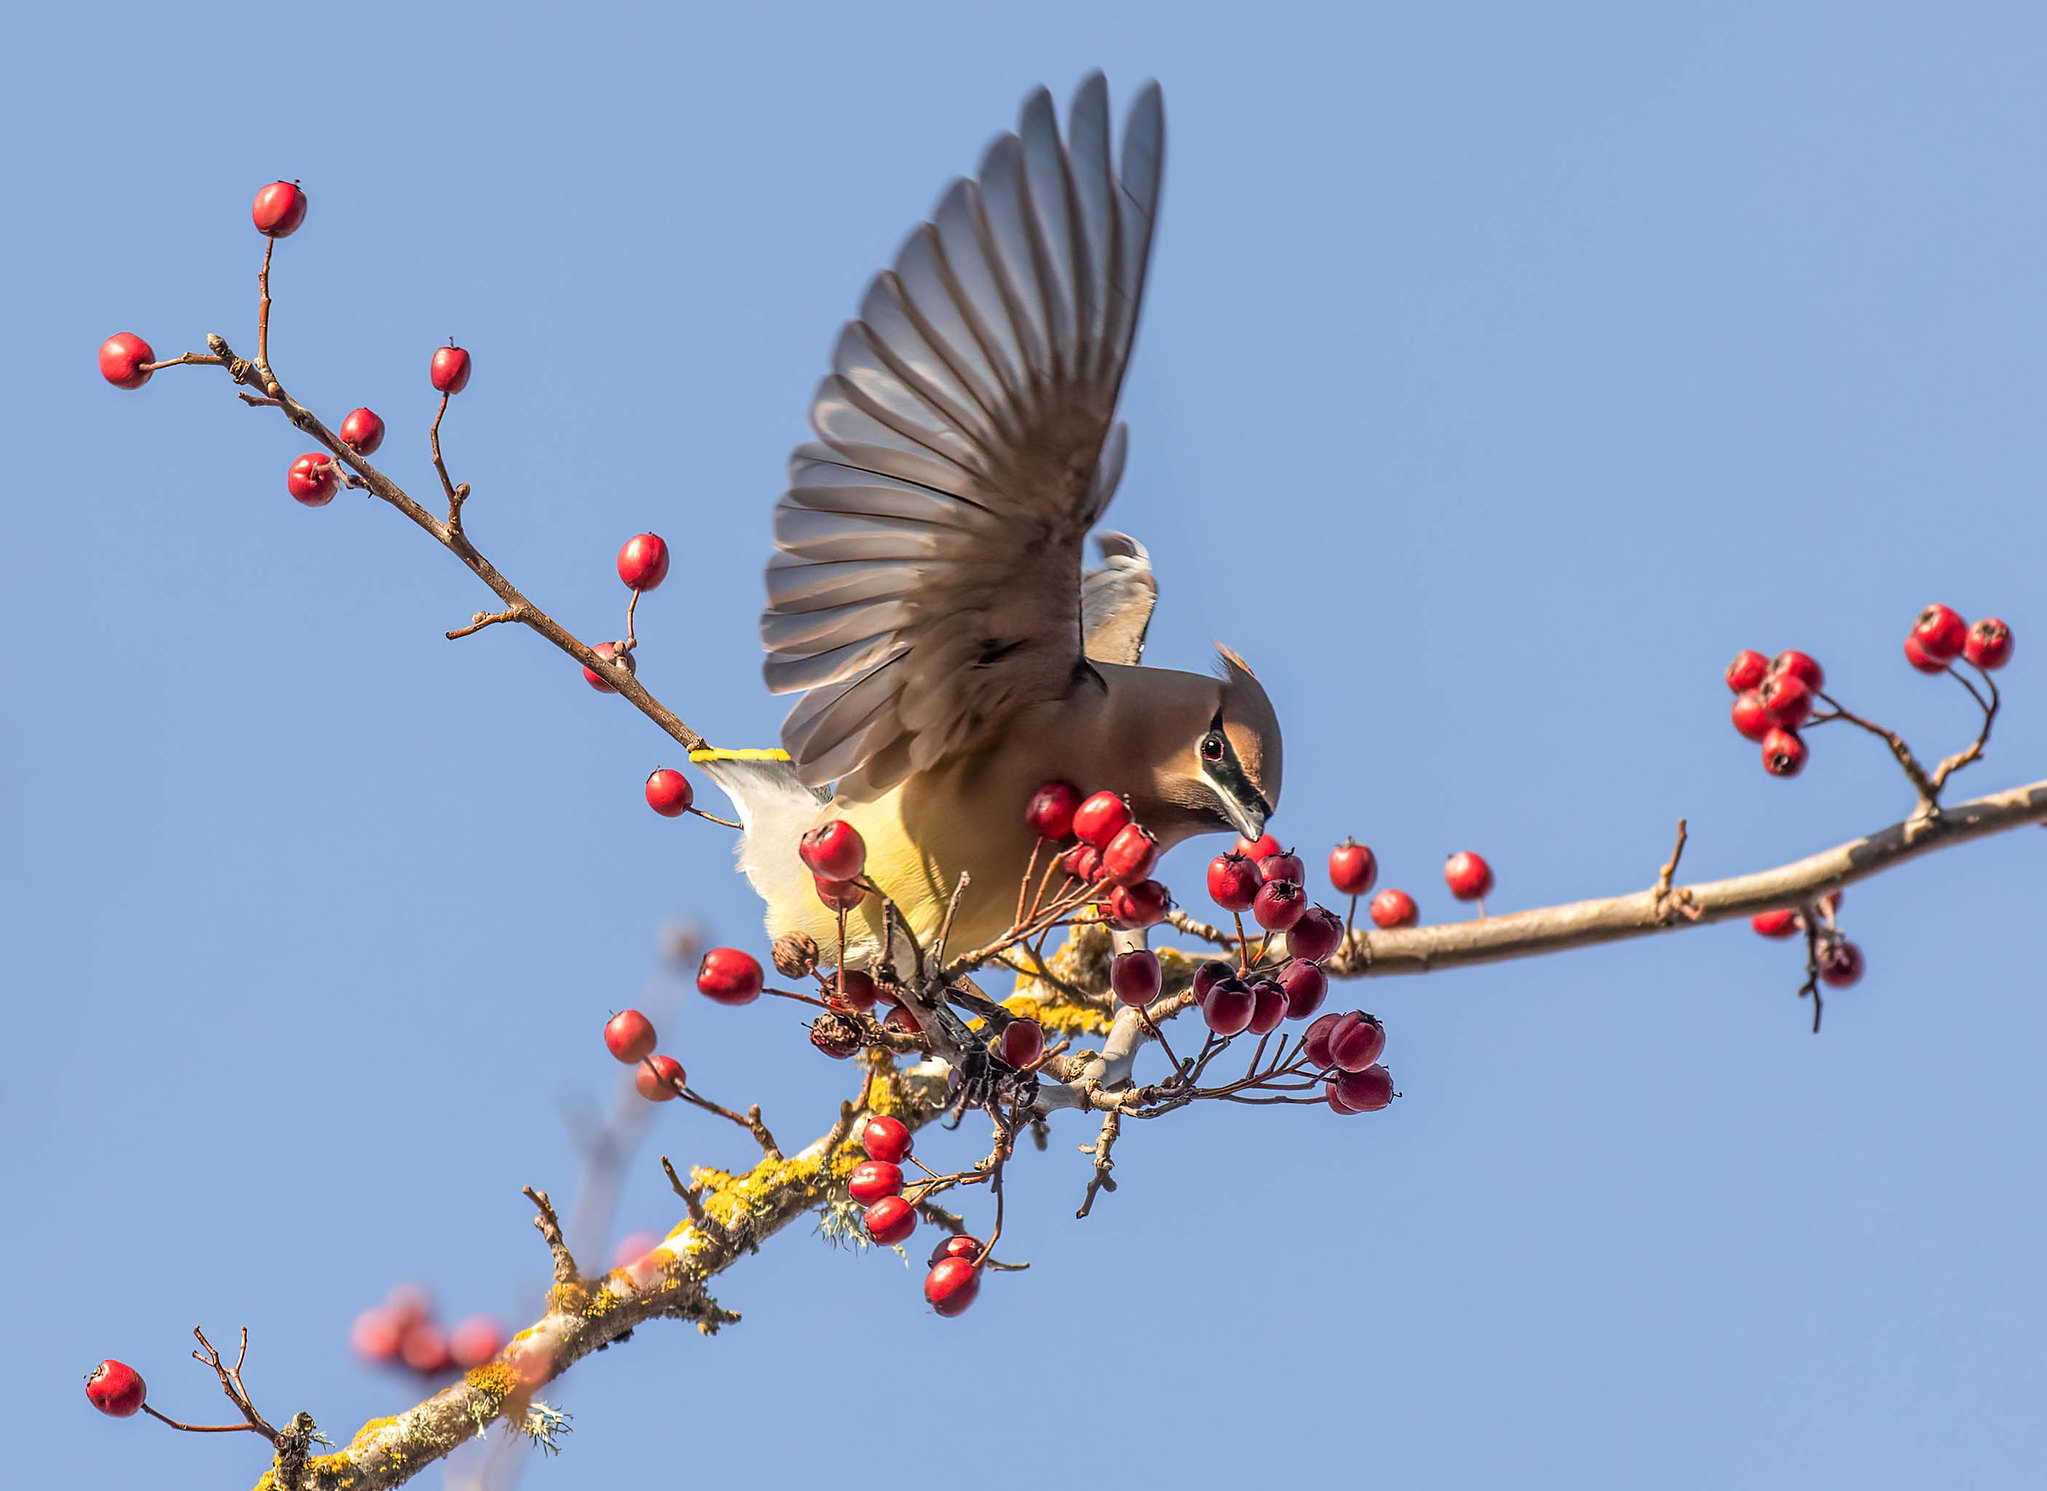 Cedar waxwing with wings spread, on a branch with red berries